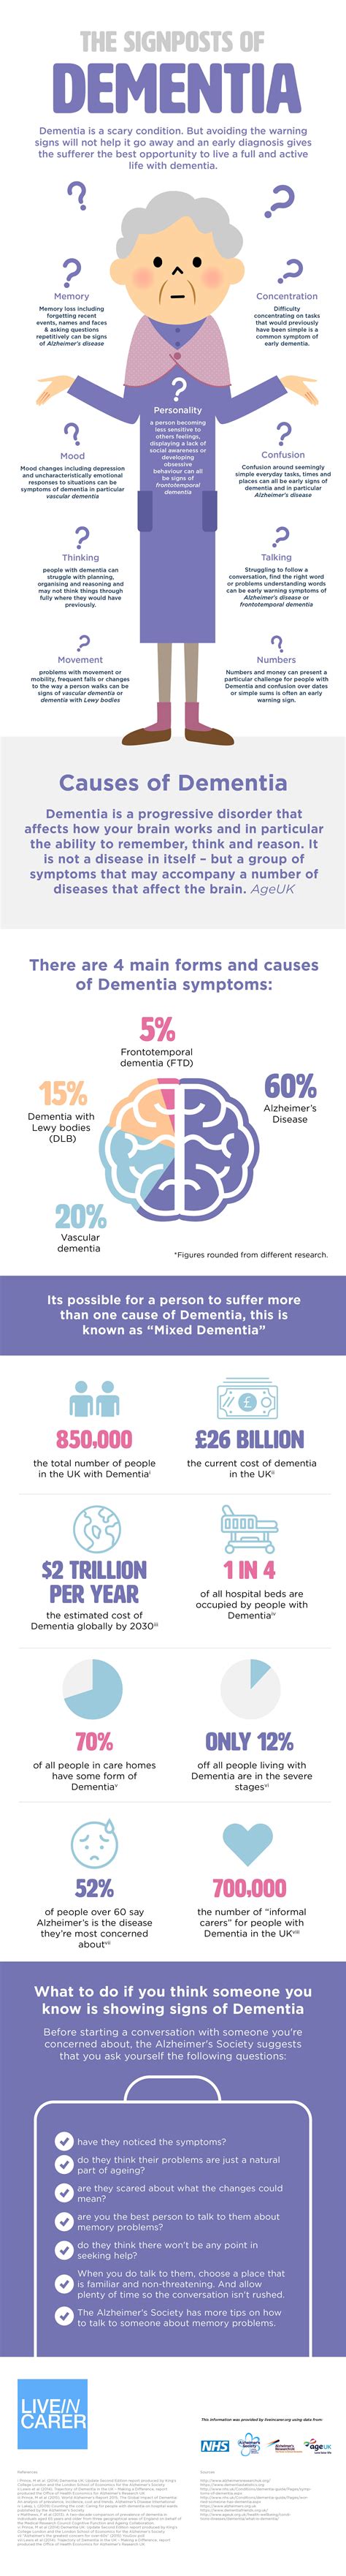 Understanding Dementia: Misperceptions and Facts - Infographic ...